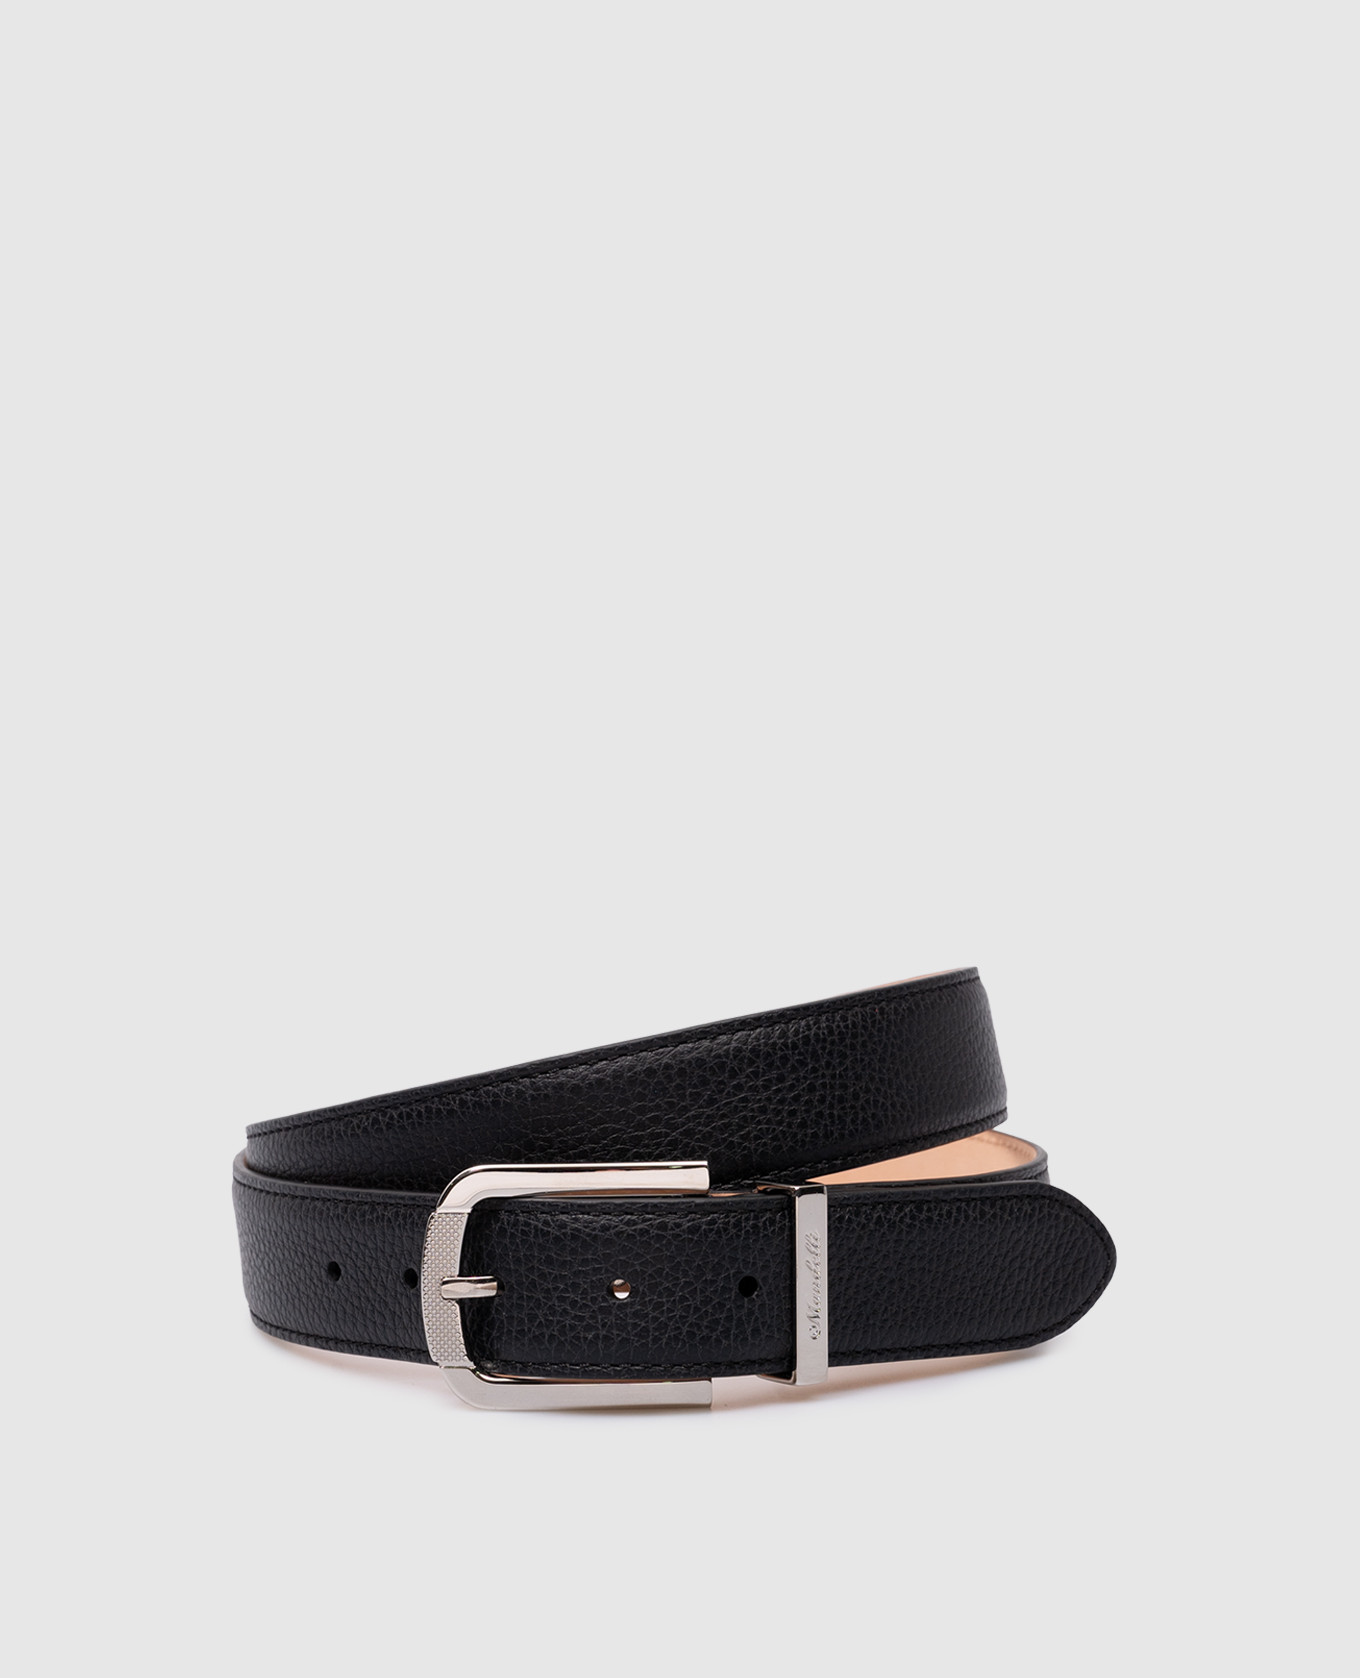 Black leather strap with logo